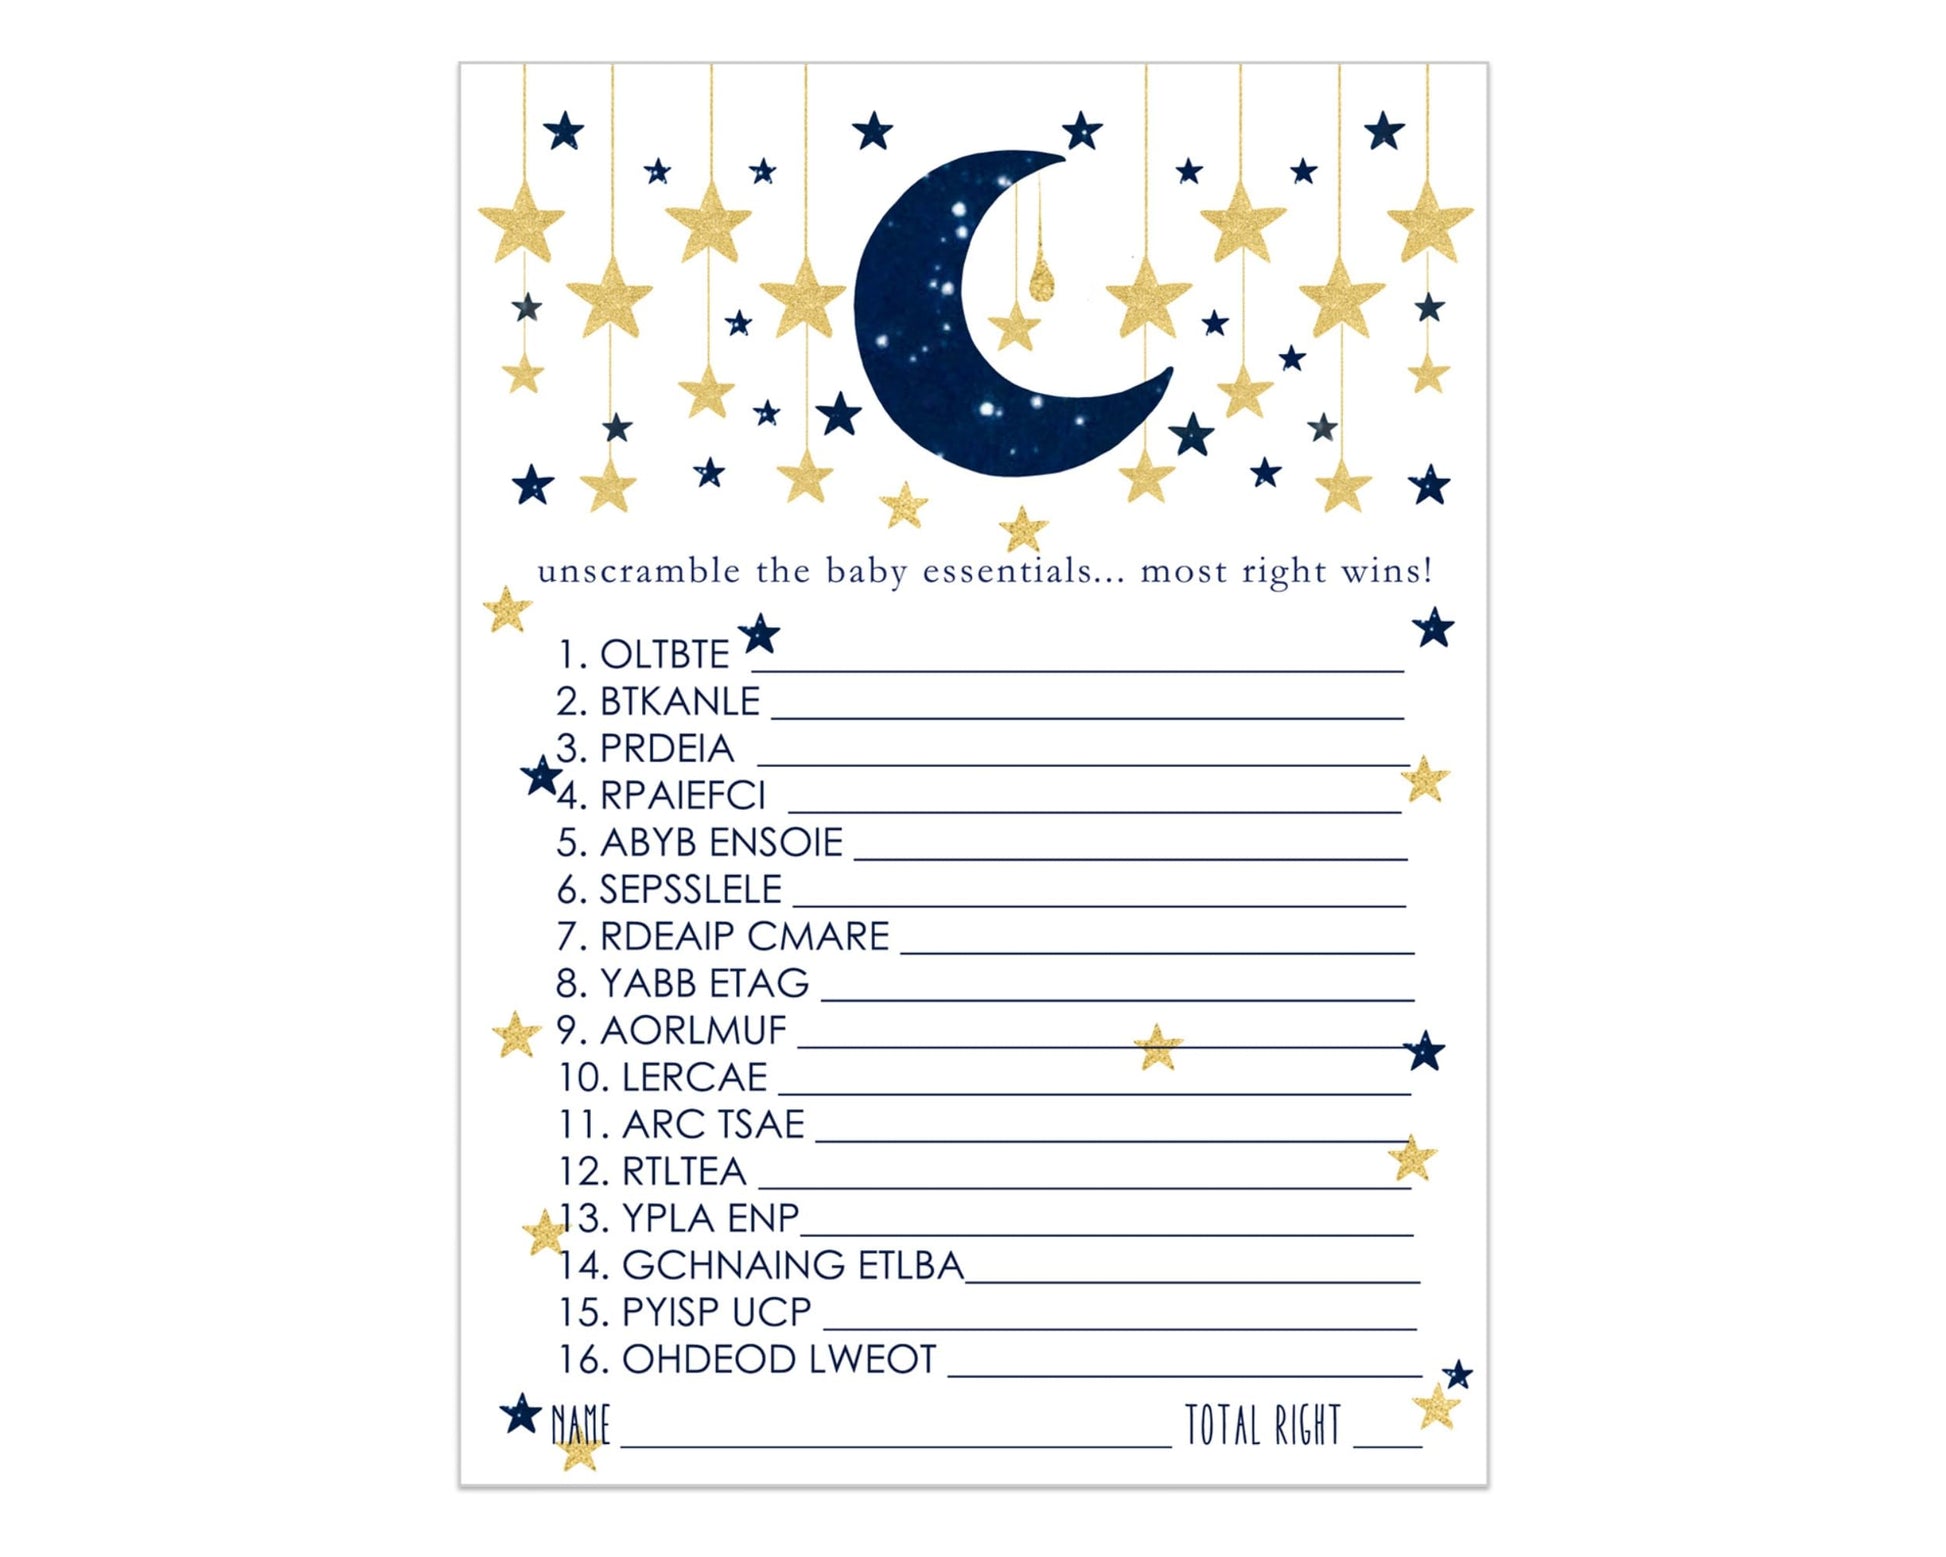 Star Baby Shower Games Word Scramble Cards (25 Pack) Unscramble Activity Cards Gender Reveal - Boys Celestial Moon Design Navy Gold Themed - Printed 5x7 Size SetPaper Clever Party